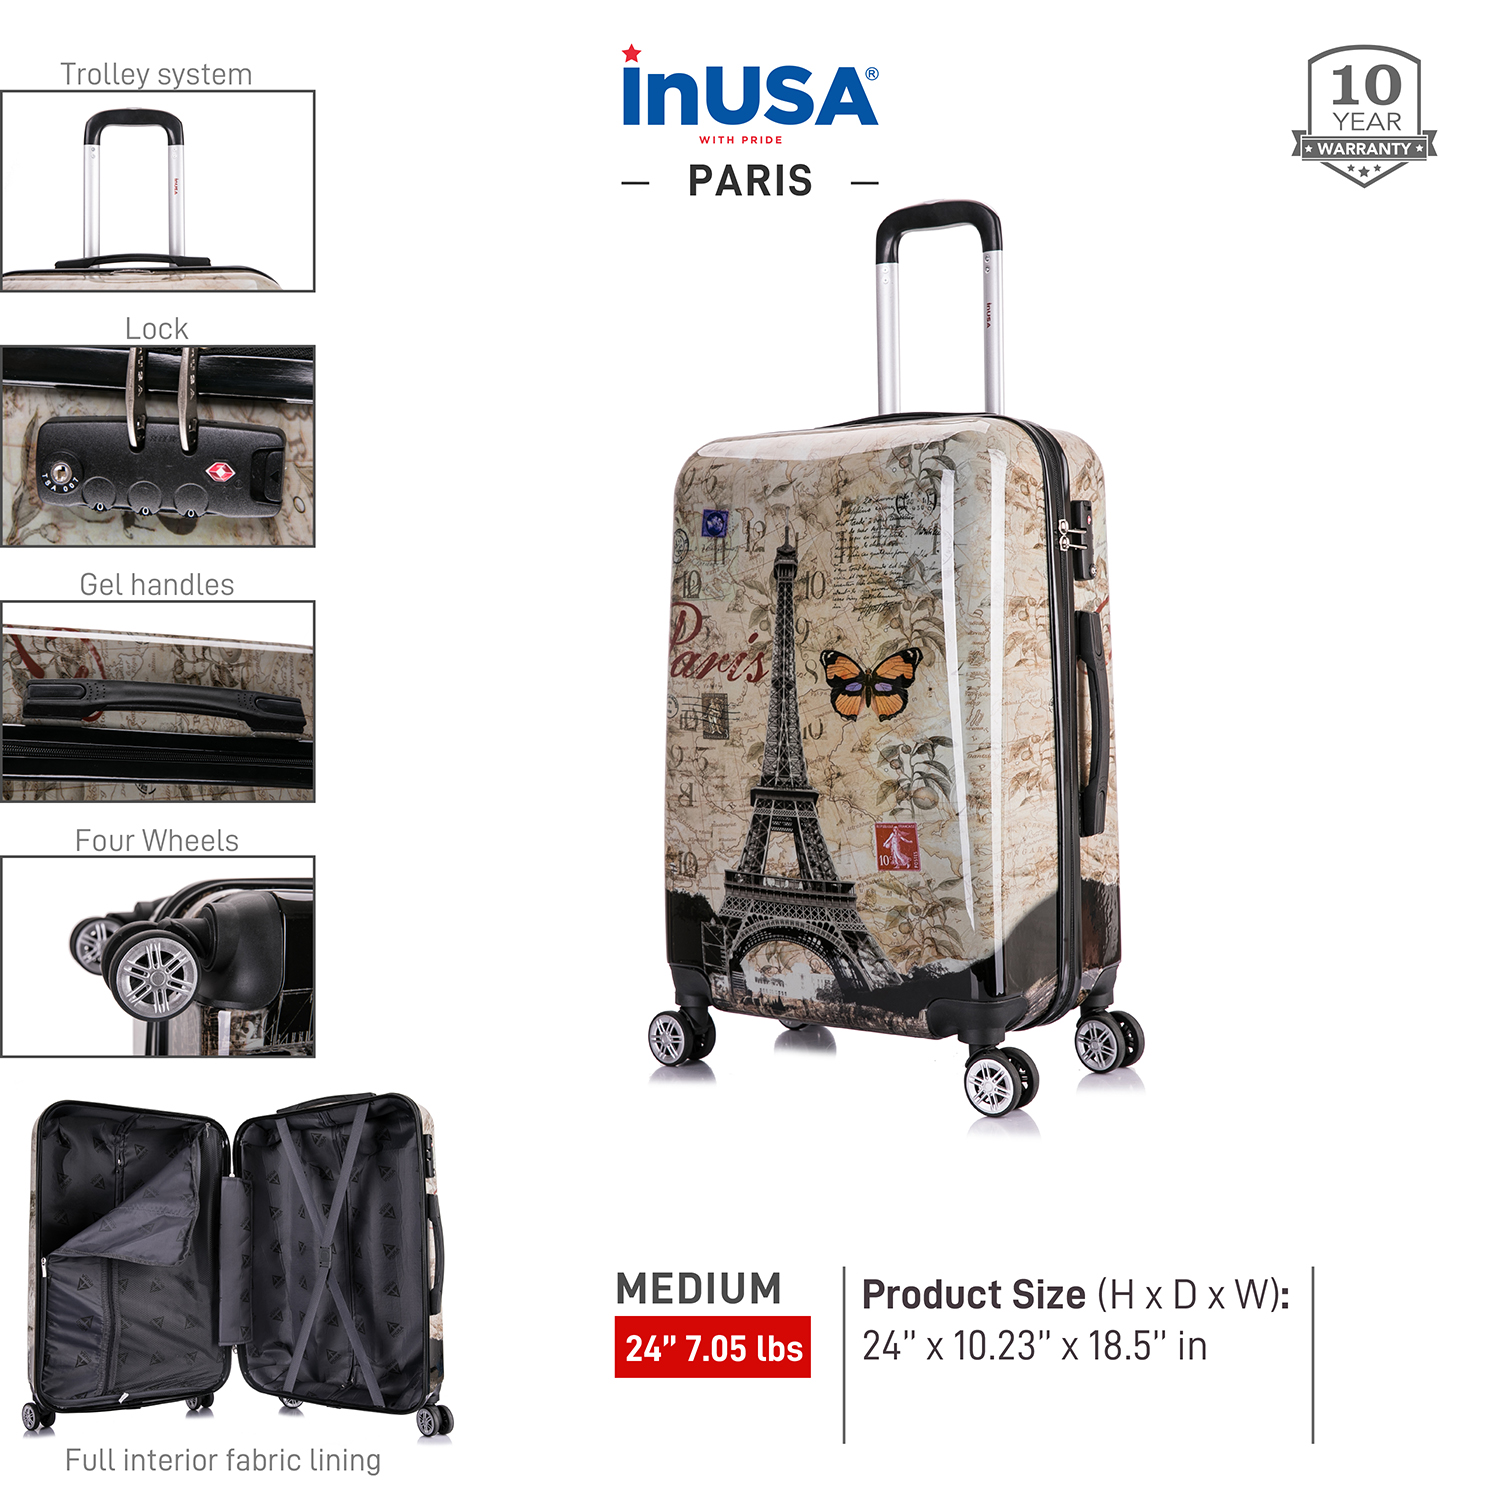 InUSA Print 24" Hardside Checked Luggage with Spinner Wheels, Handle and Trolley, Paris - image 10 of 15